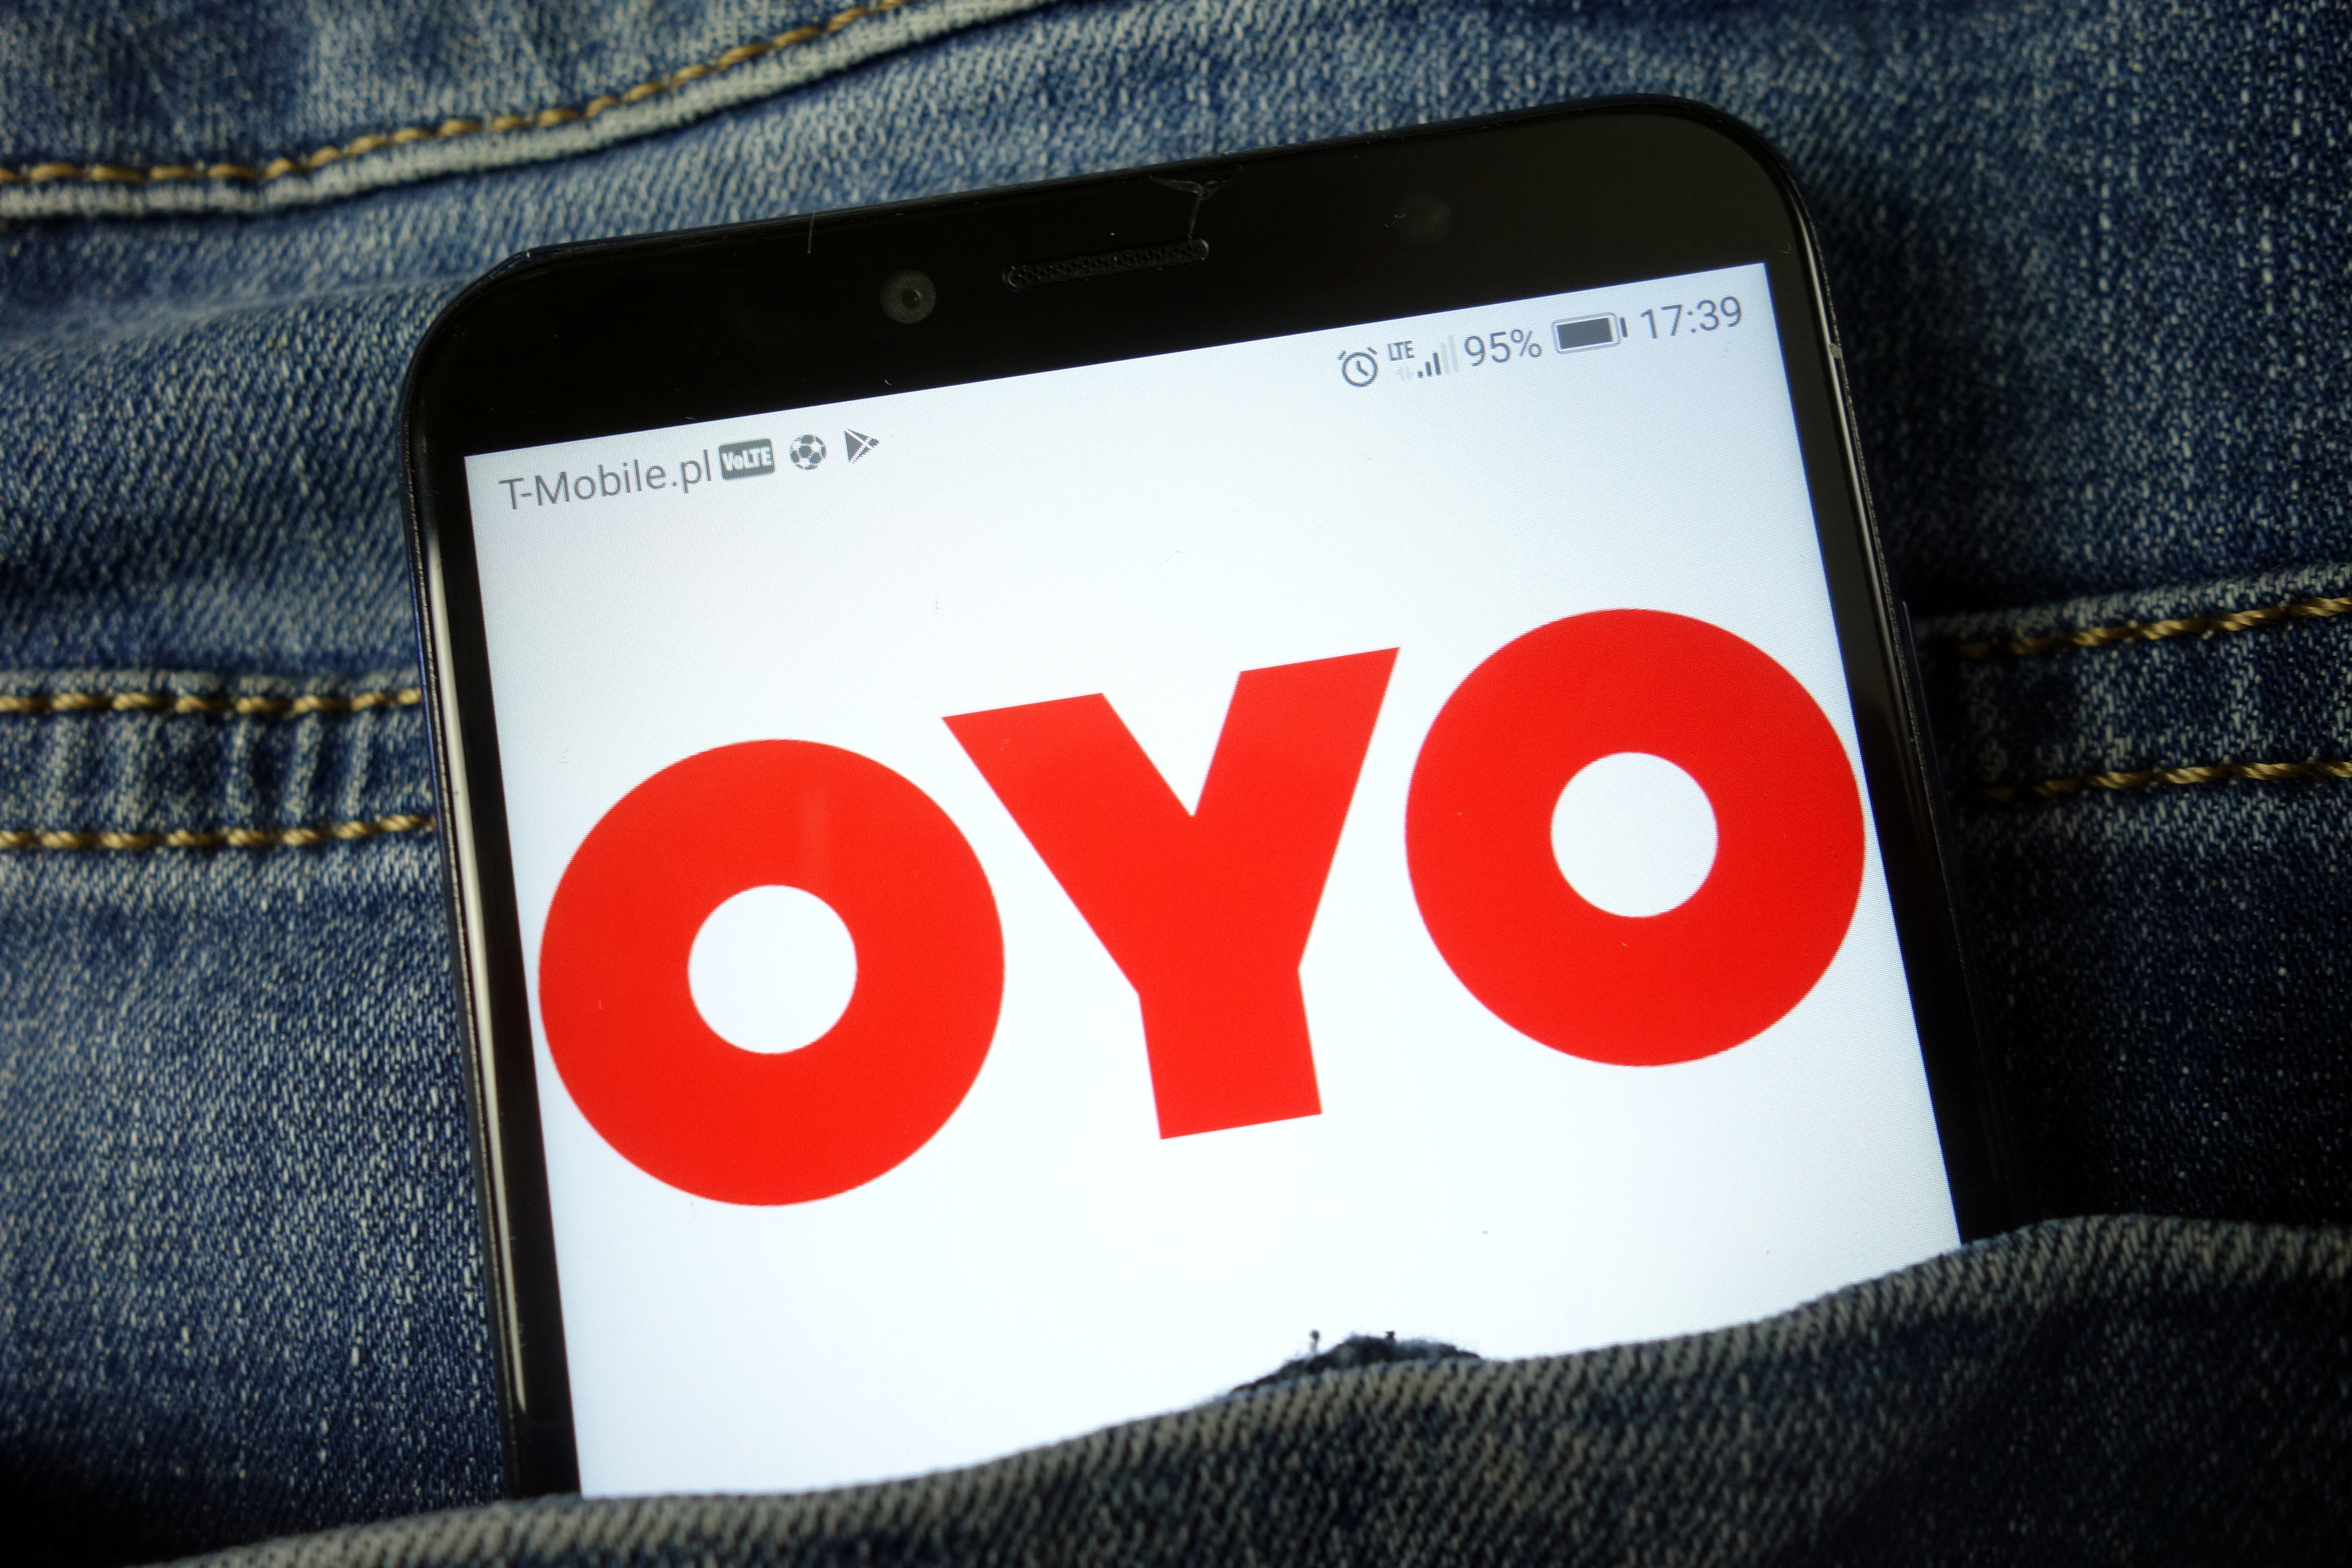 SoftBank-backed Oyo receives USD 660 million loan from global investors to clear debts